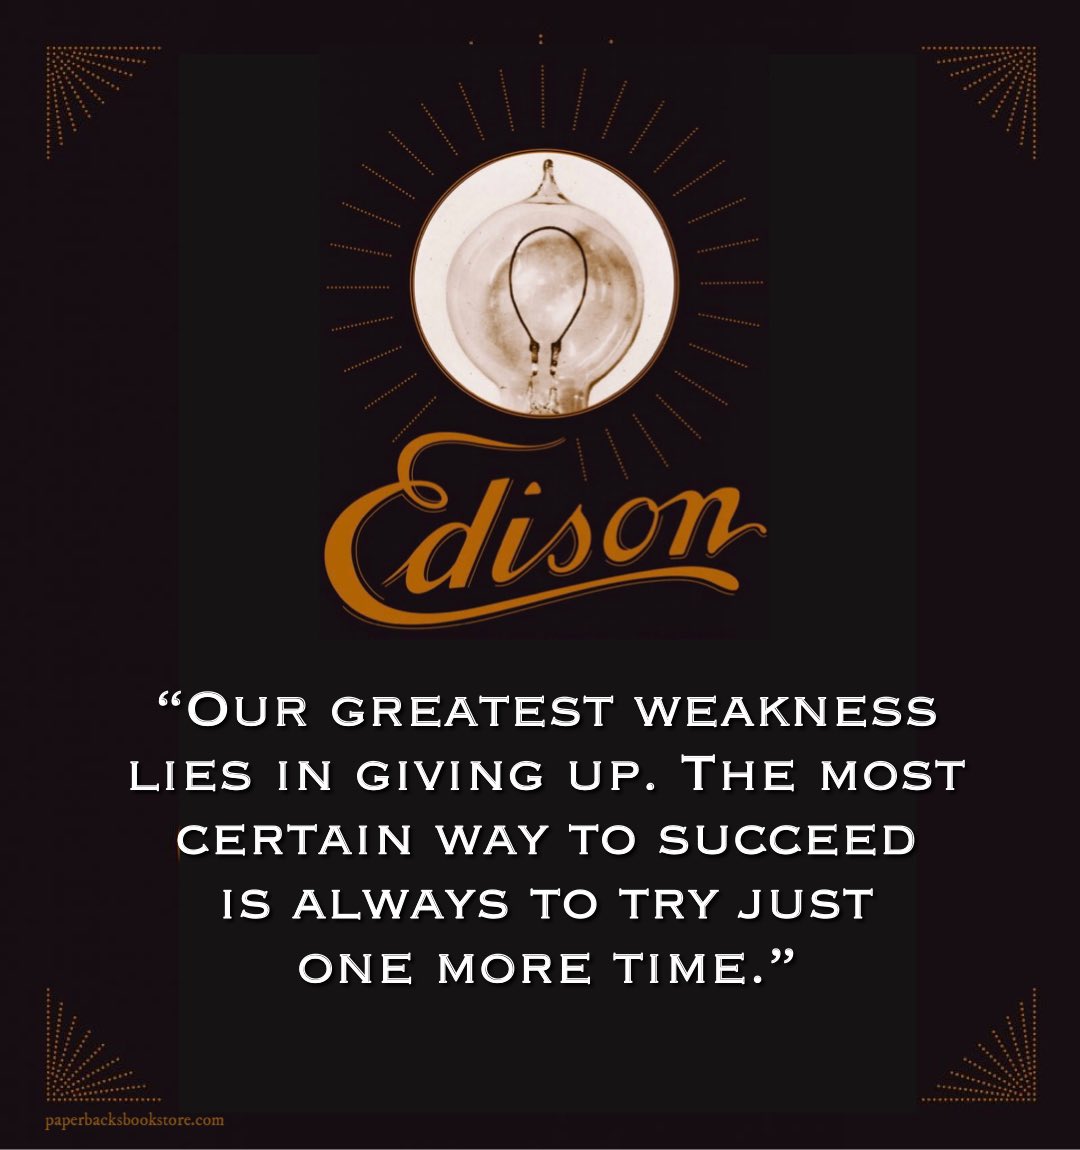 💡
“Our greatest weakness lies in giving up. The most certain way to succeed is always to try just one more time.” ~Thomas Edison

#greatestweakness #weakness #givingup #certaintosucceed #success #tryagain #onemoretime #ThomasEdison #books #bookart #fiction #booklovers #booklover